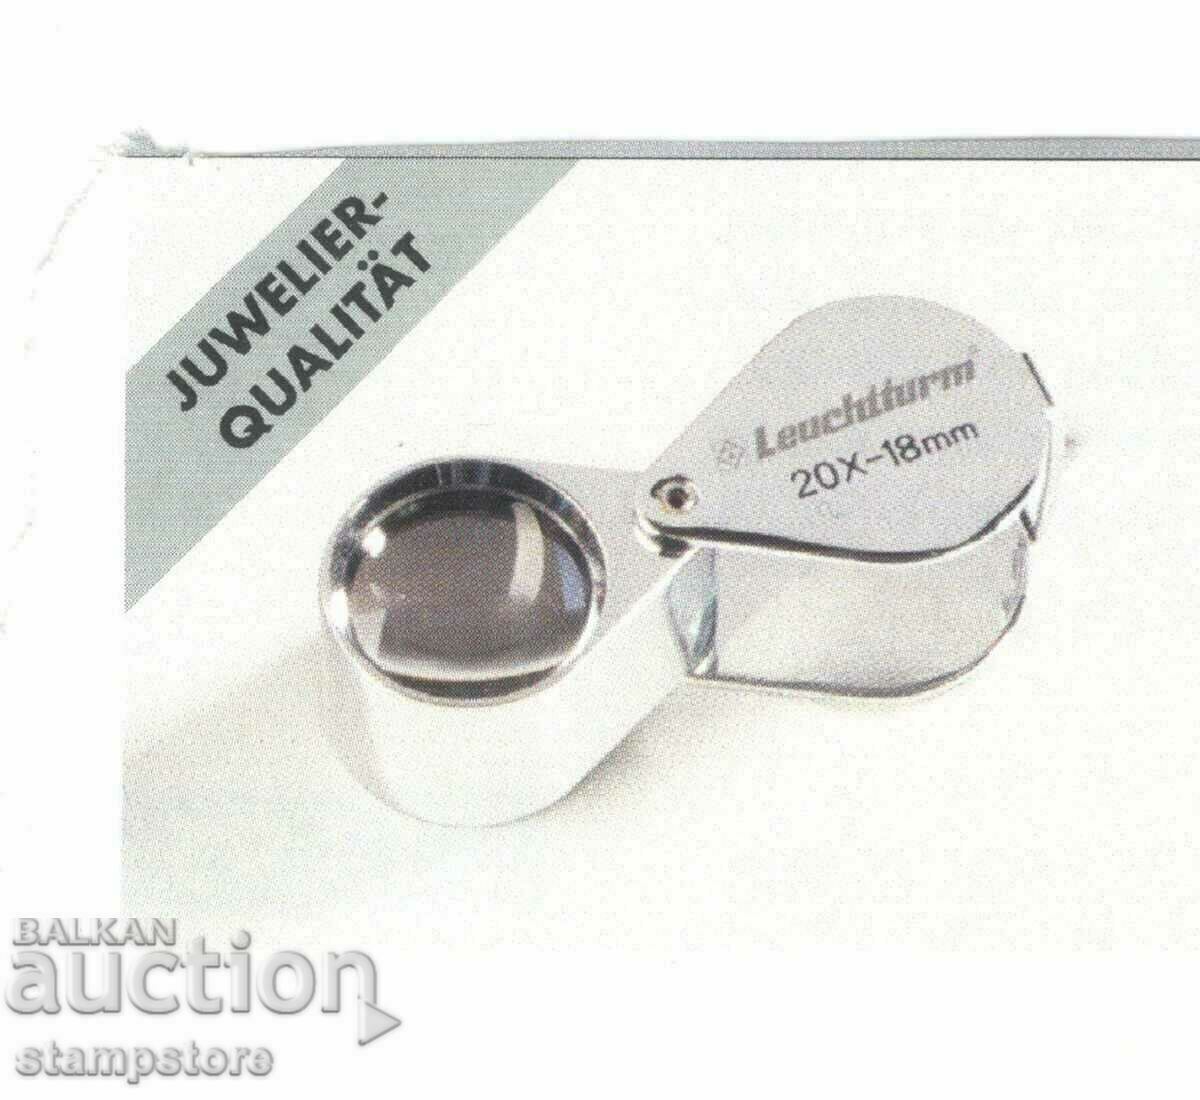 Chrome-plated precision magnifier with 20x magnification